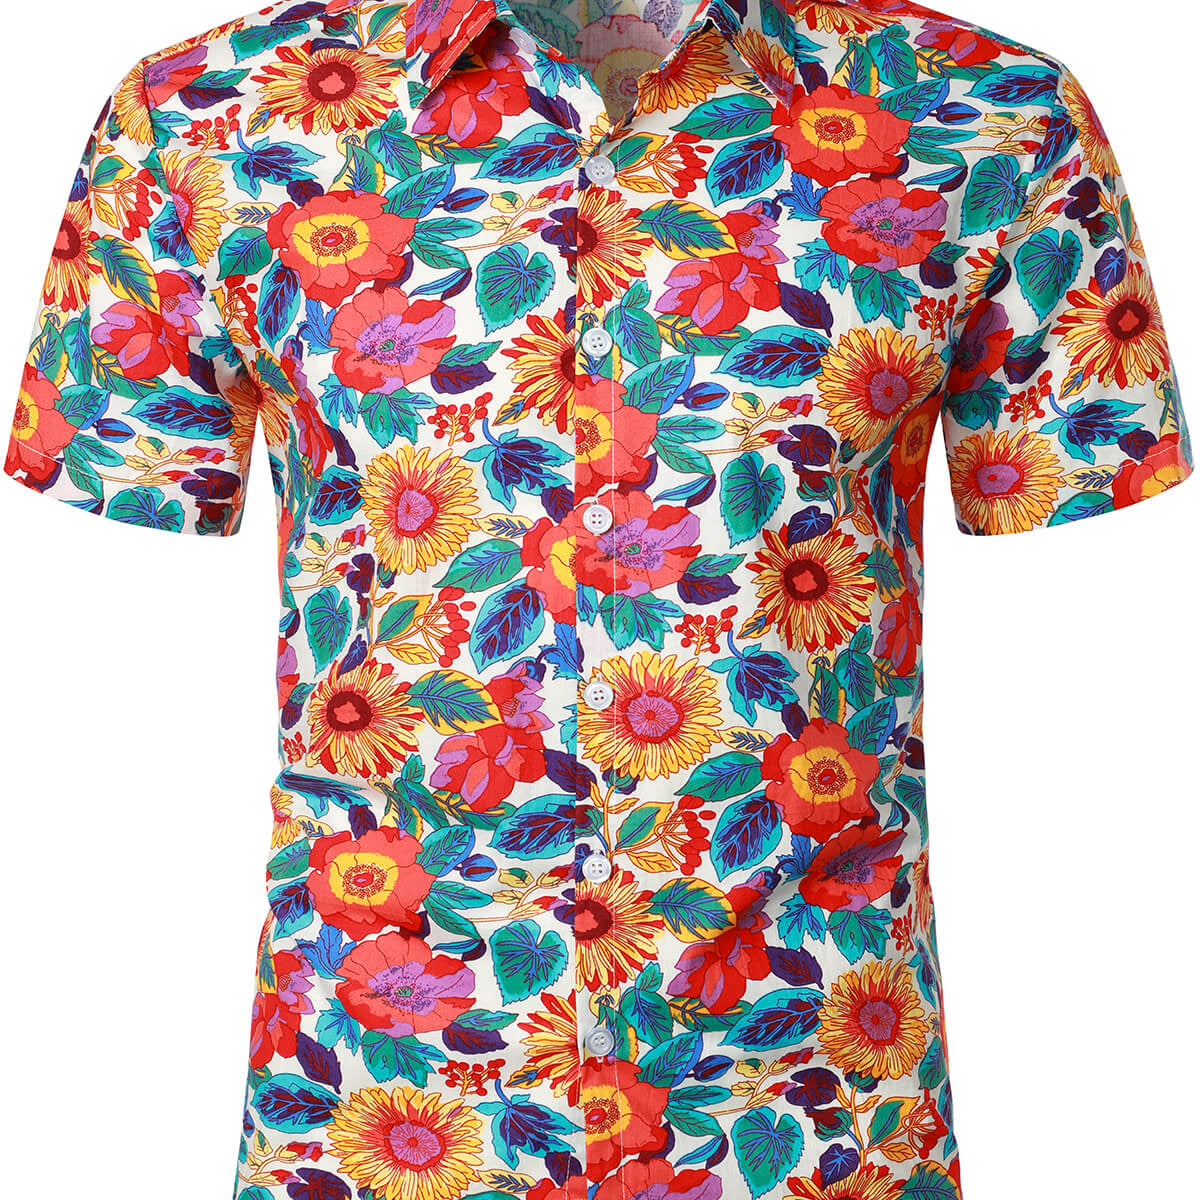 Men's Casual 70s Floral Retro Funky Beach Button Up Short Sleeve Shirt